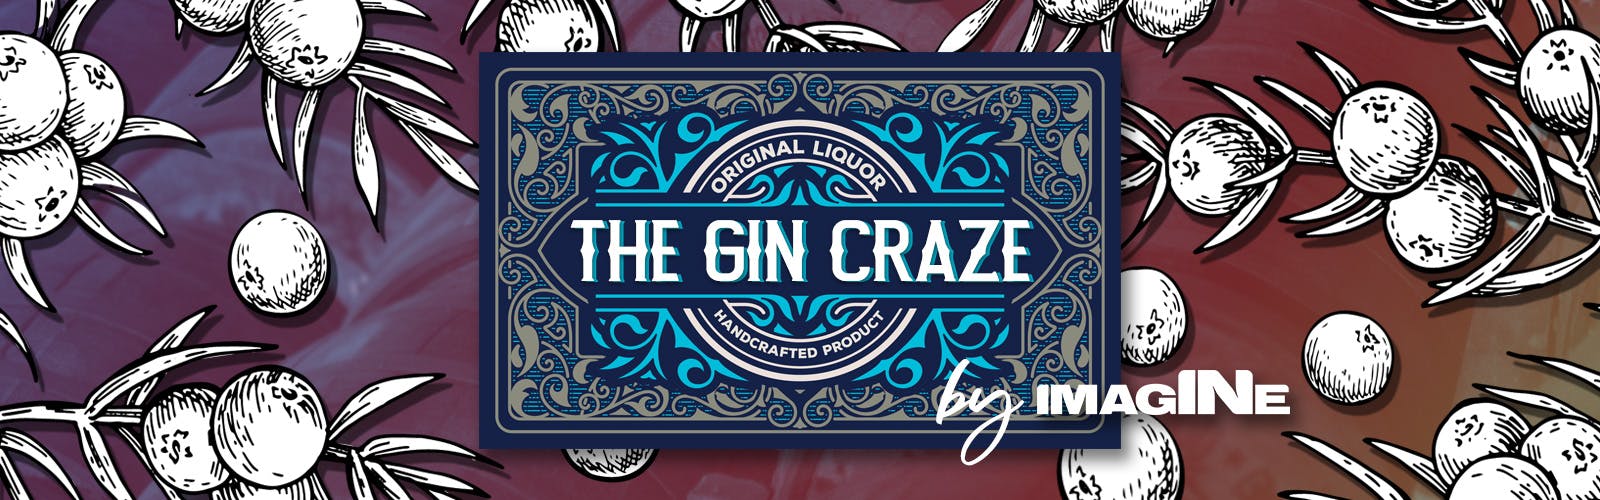 The Gin Craze experience in London with Gin Palace and distillery tour